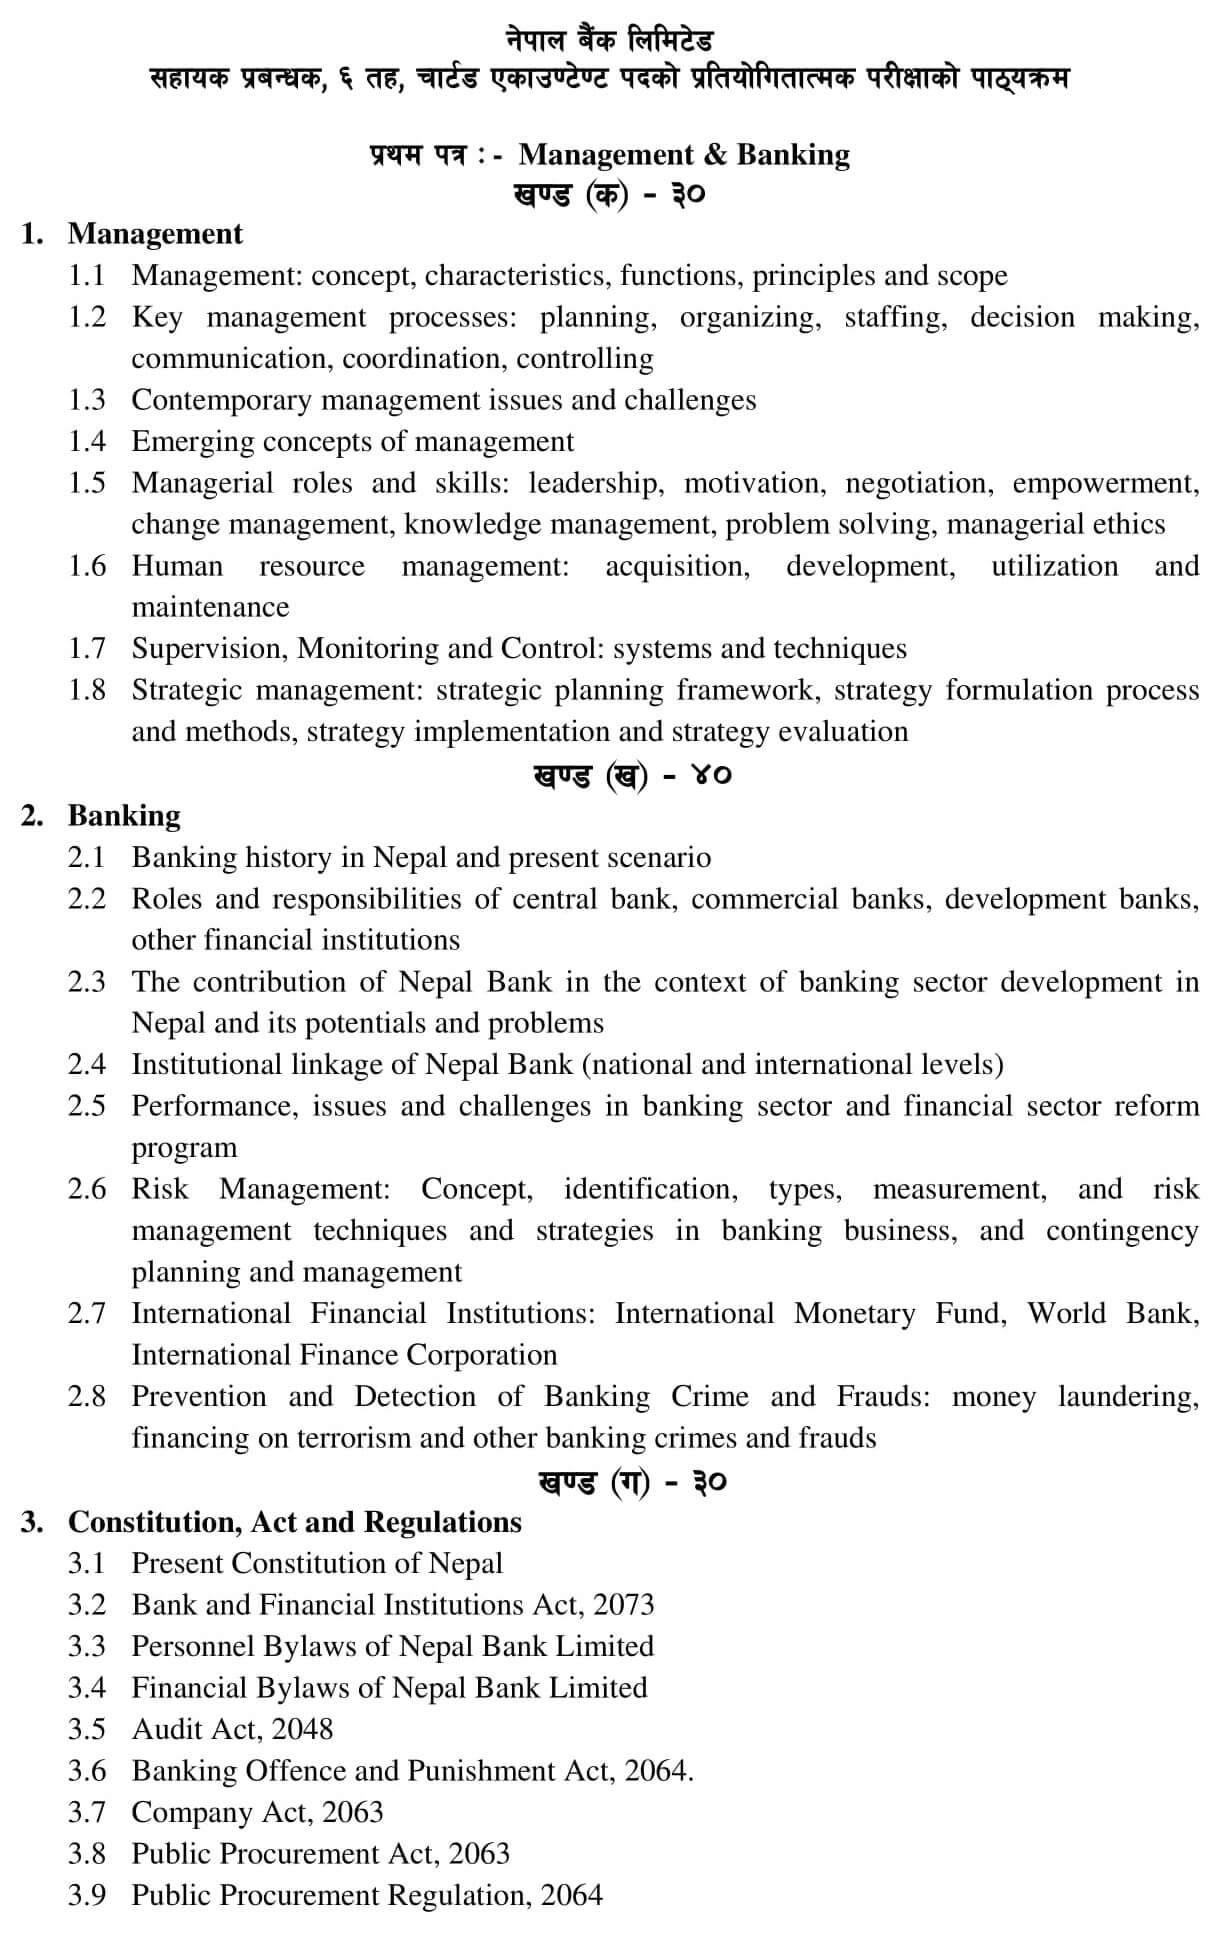 Syllabus of Nepal Bank Limited Level 6 Chartered Accountant